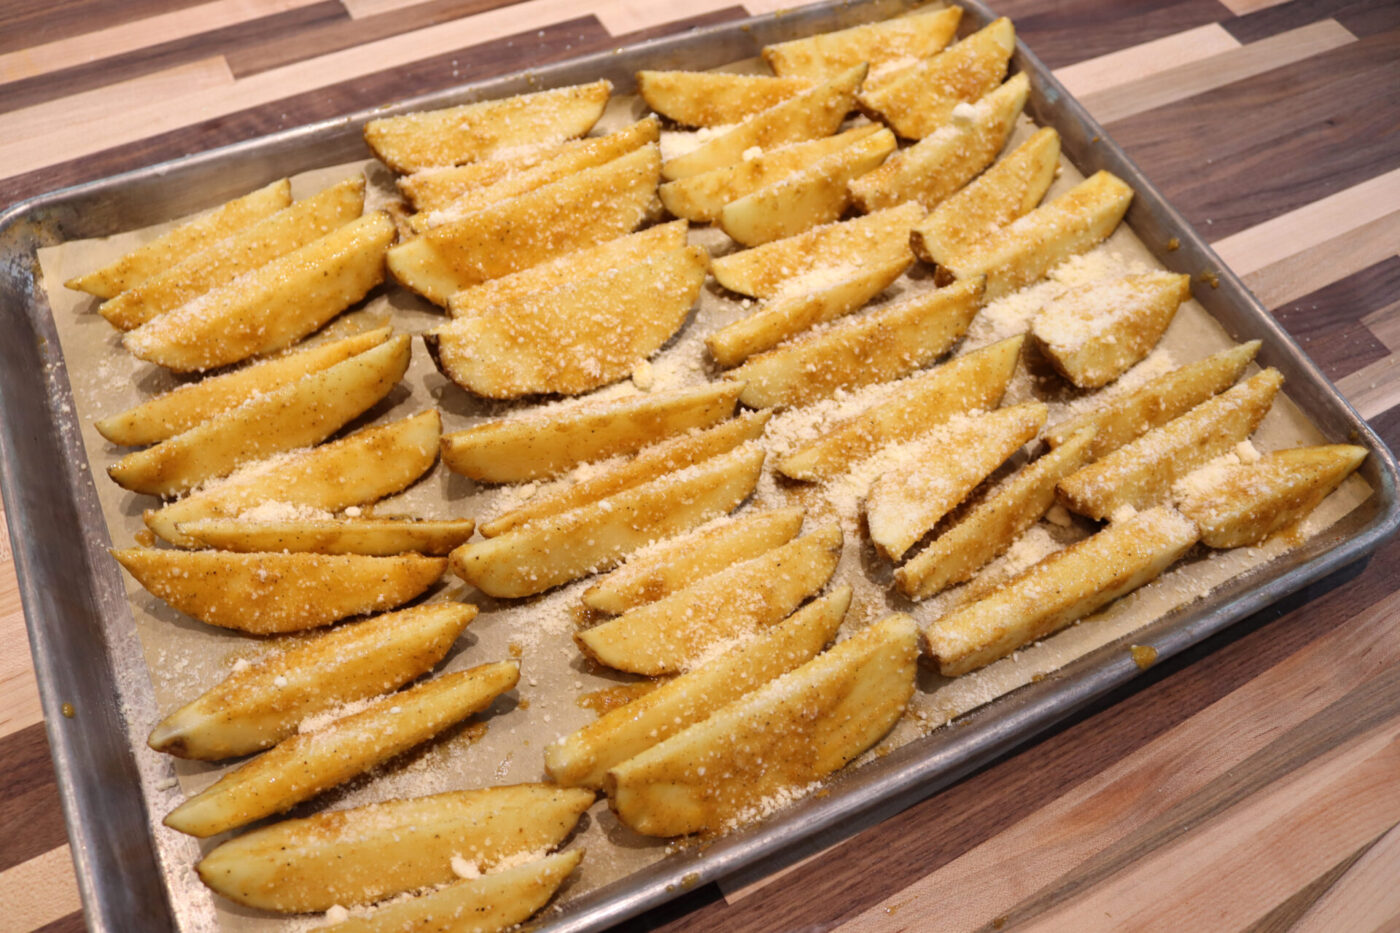 Oven-Baked Potato Wedges process 8